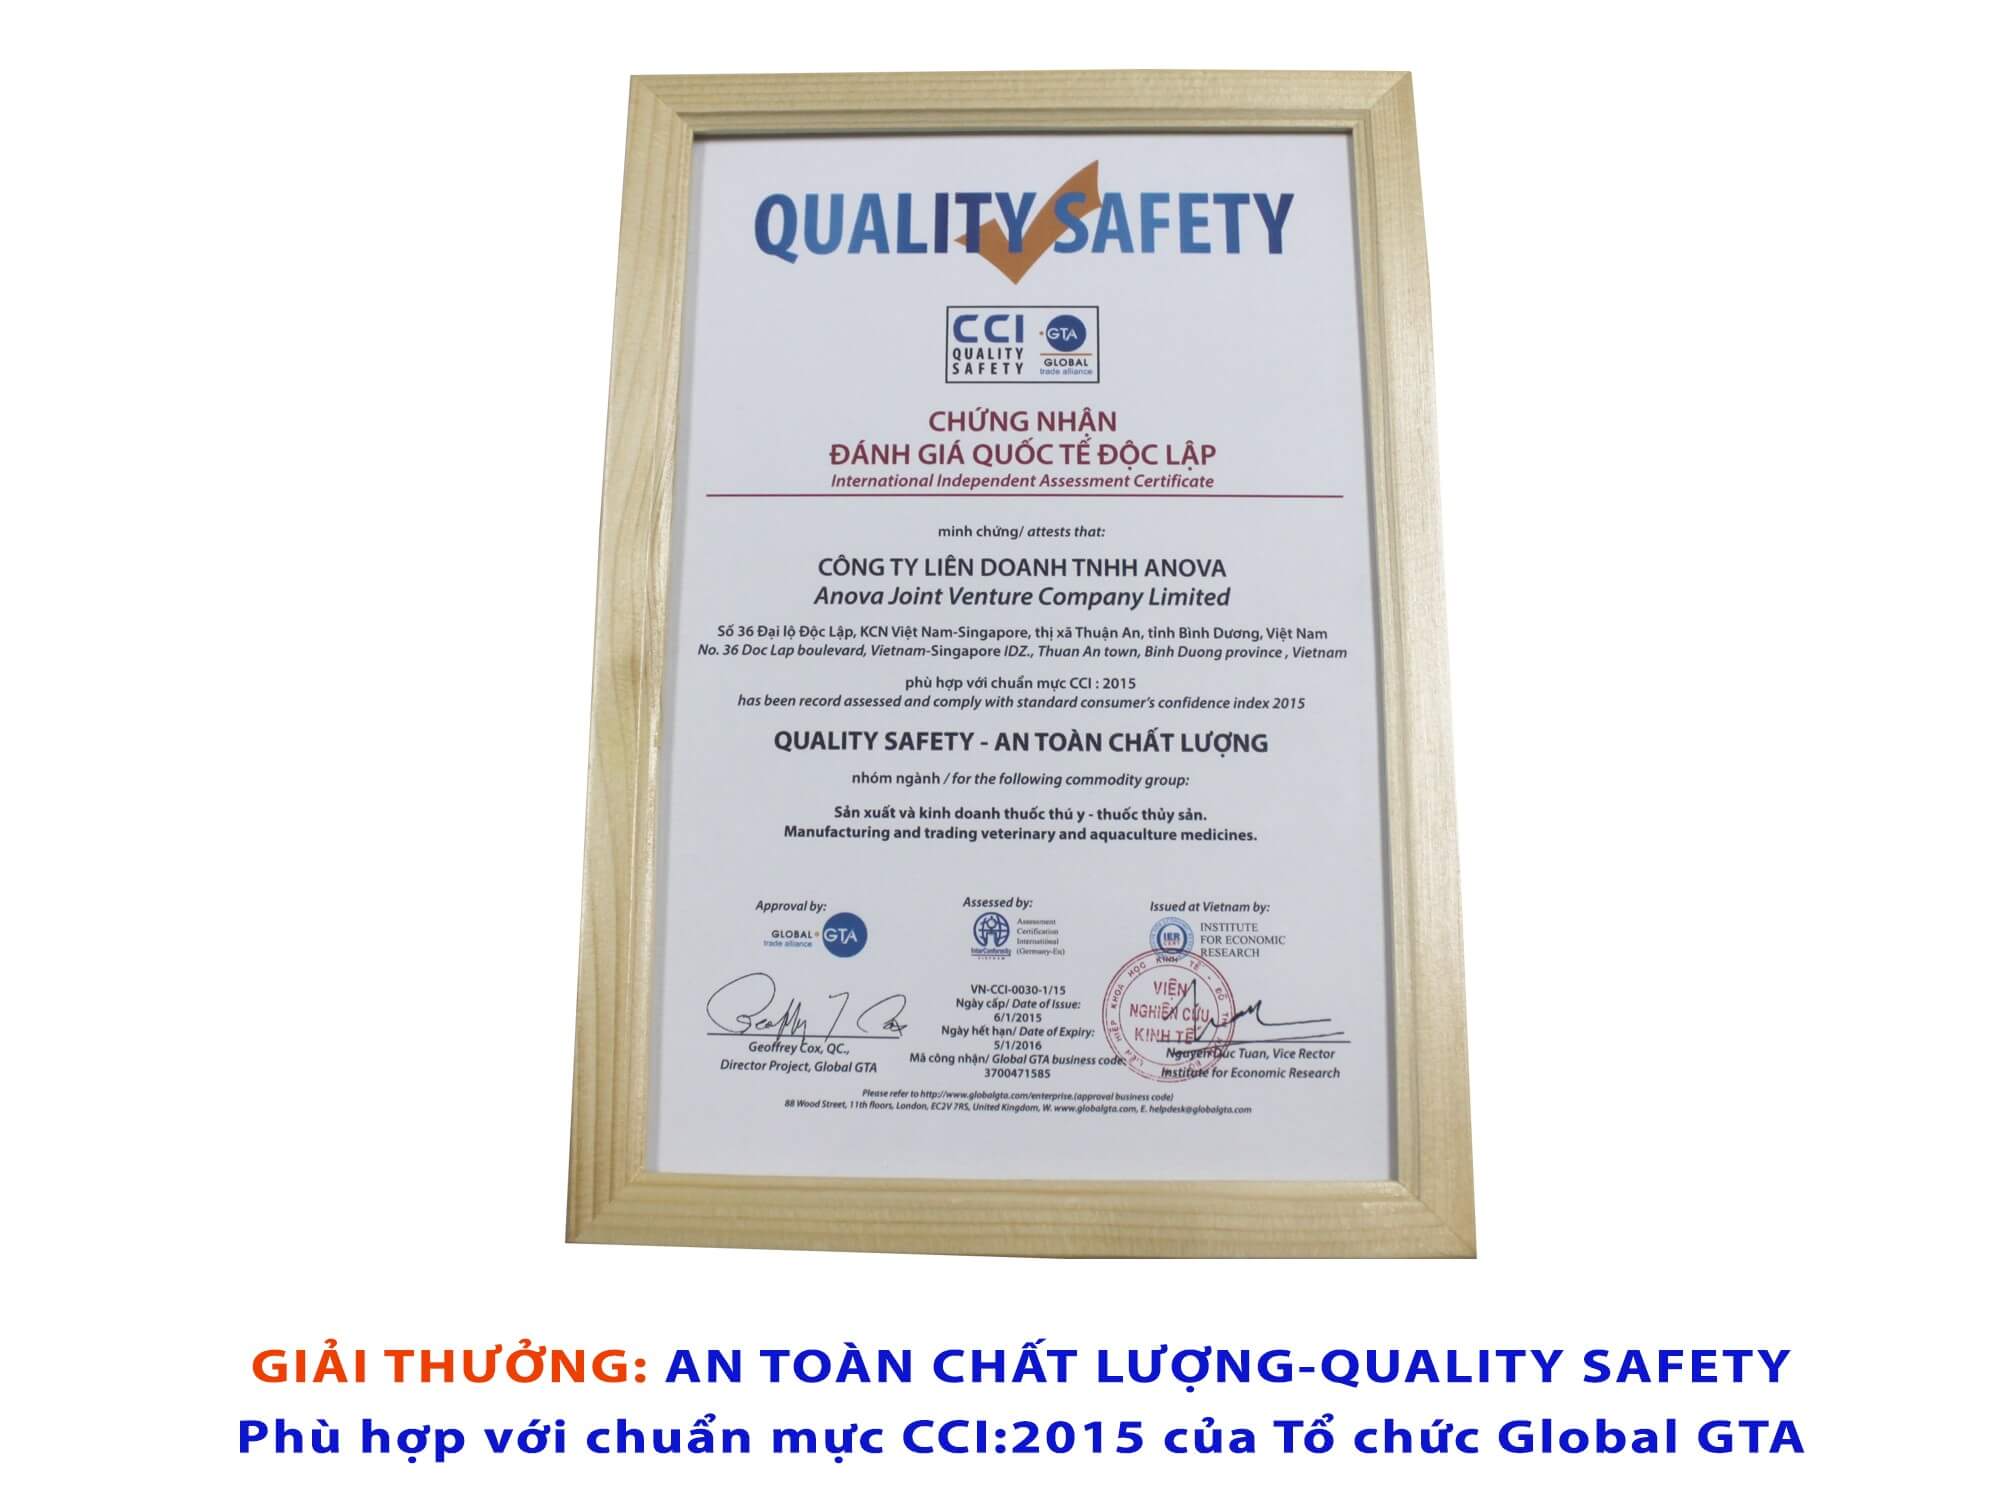 Quality Safety Certificate (Conforms to CCI:2015) granted by Economic Research Institute & Global GTA